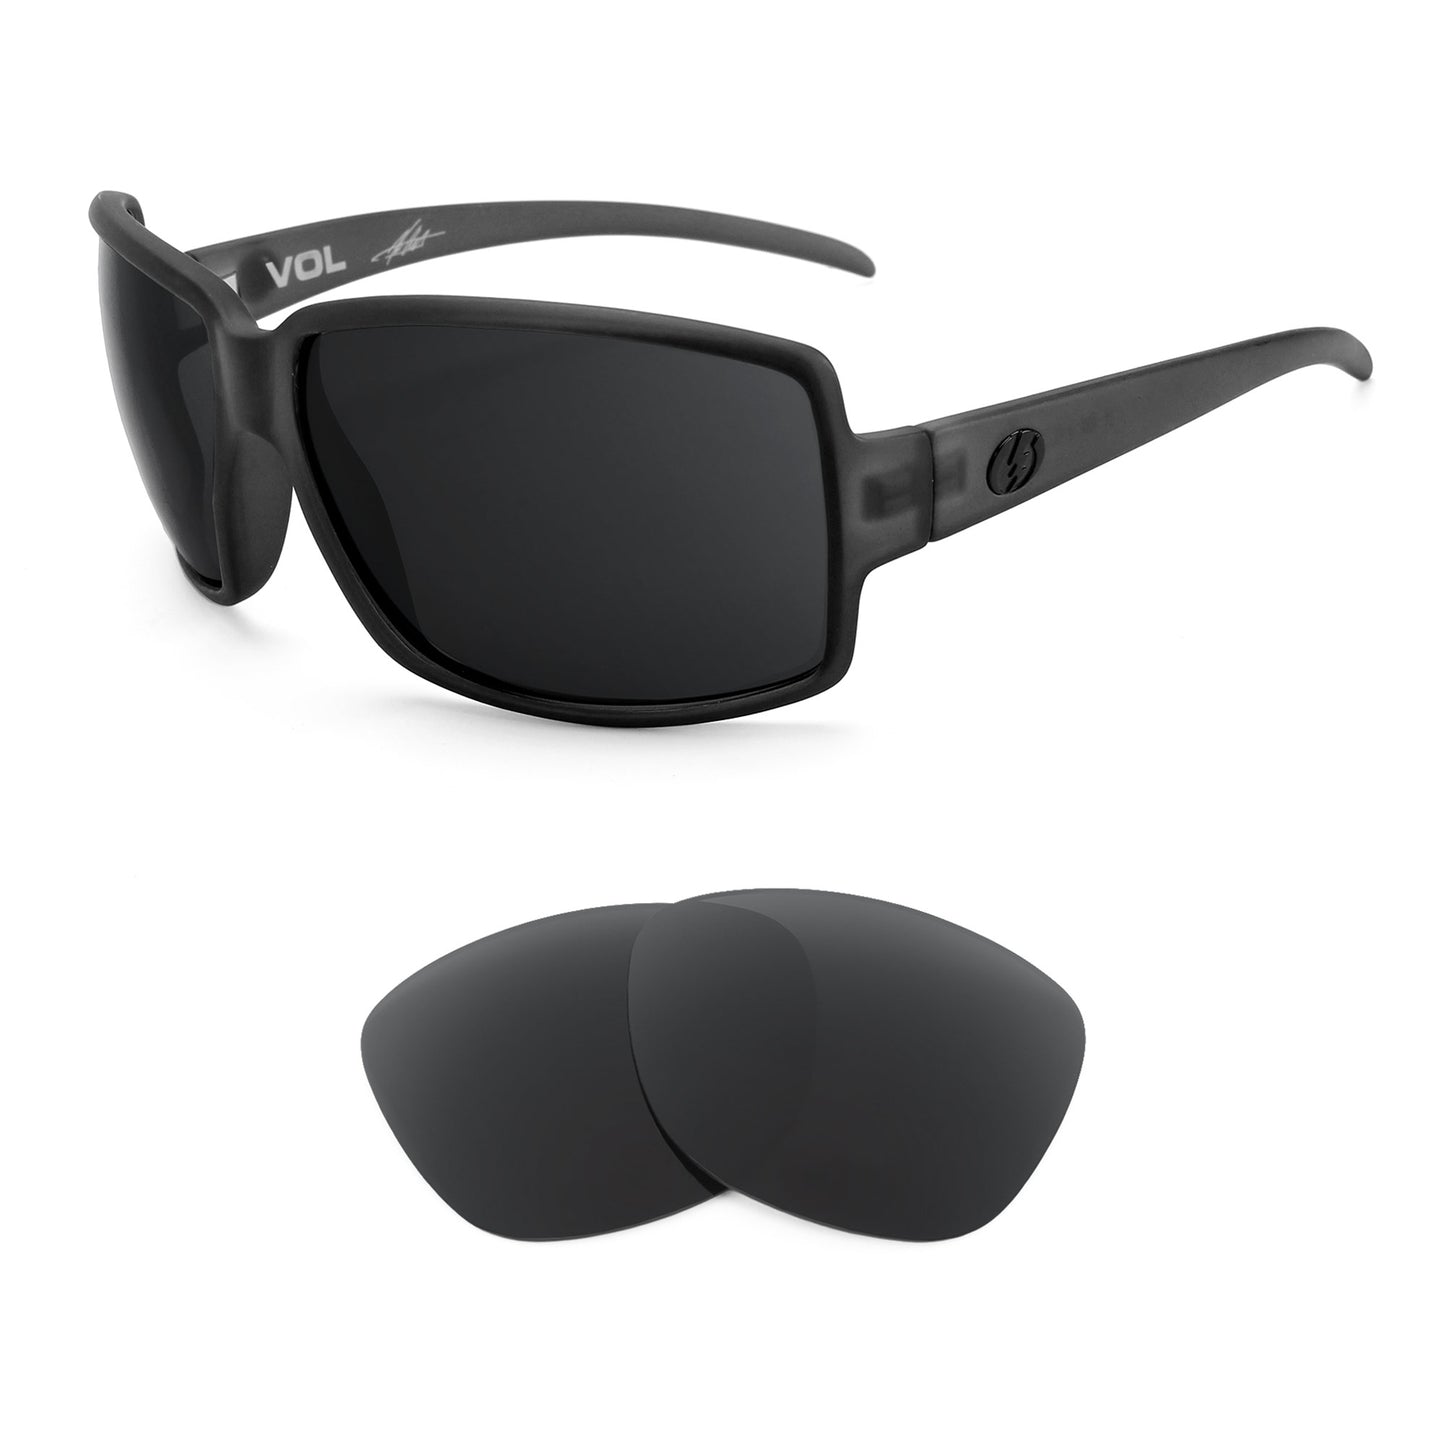 Electric Vol sunglasses with replacement lenses